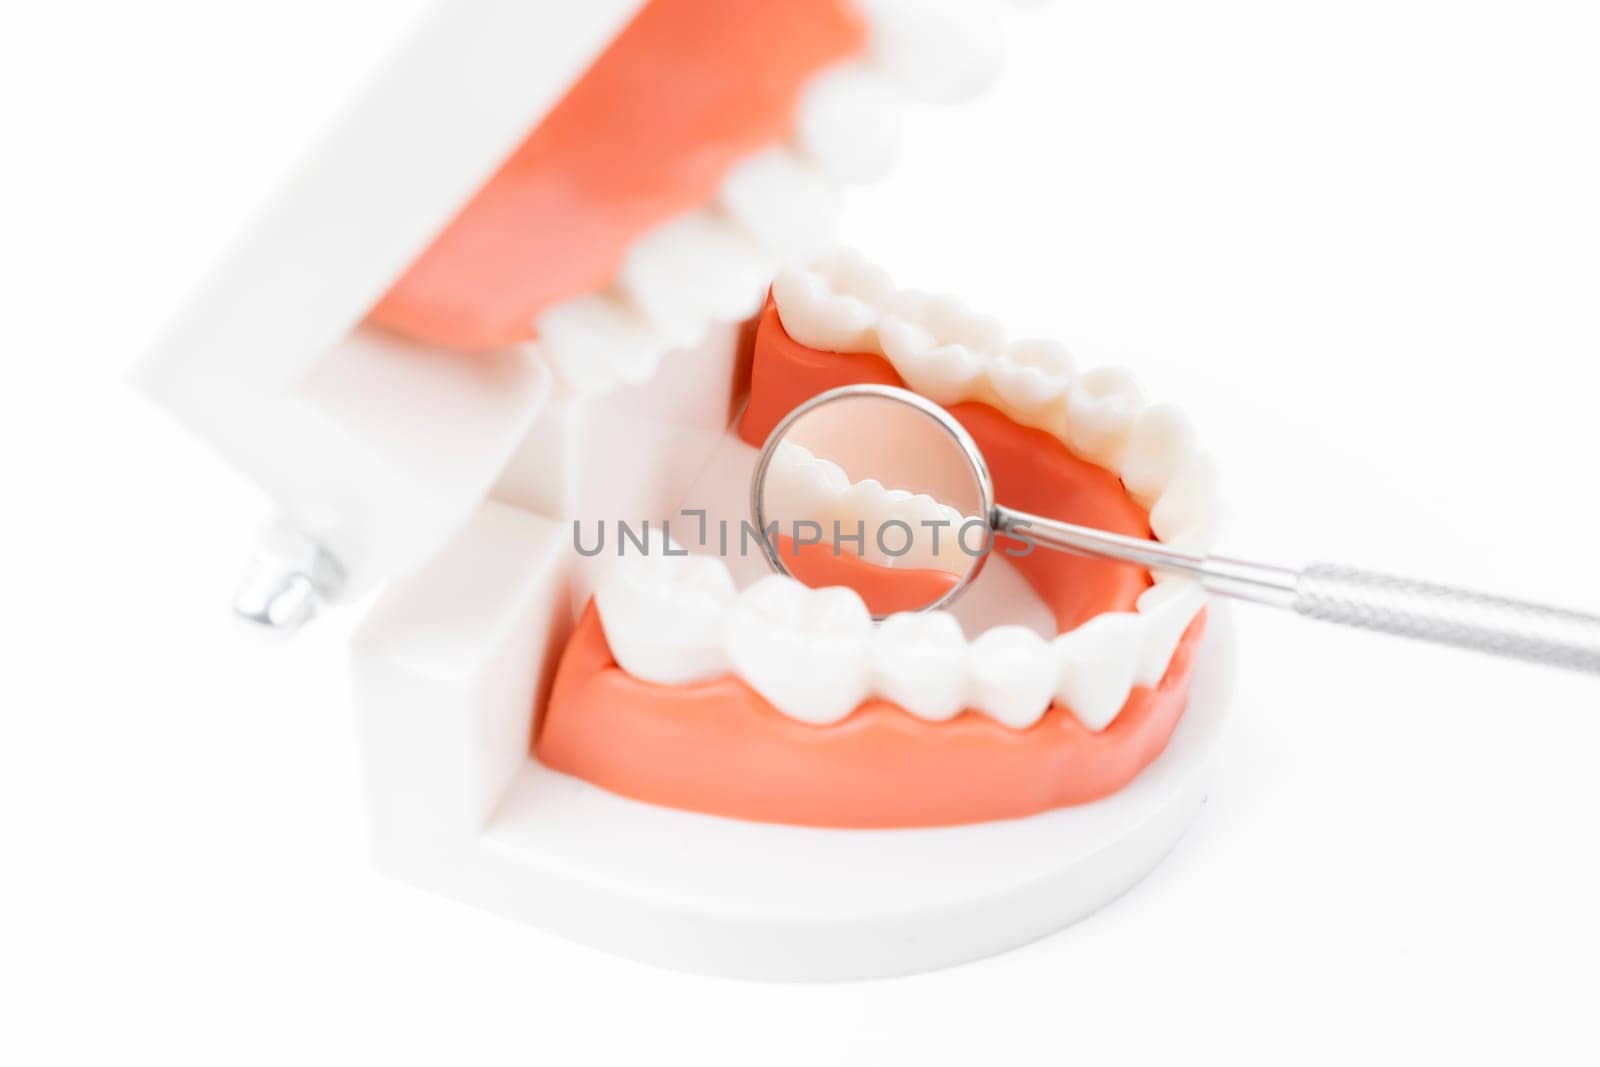 A Teeth model with dental mirror on white background by Gamjai